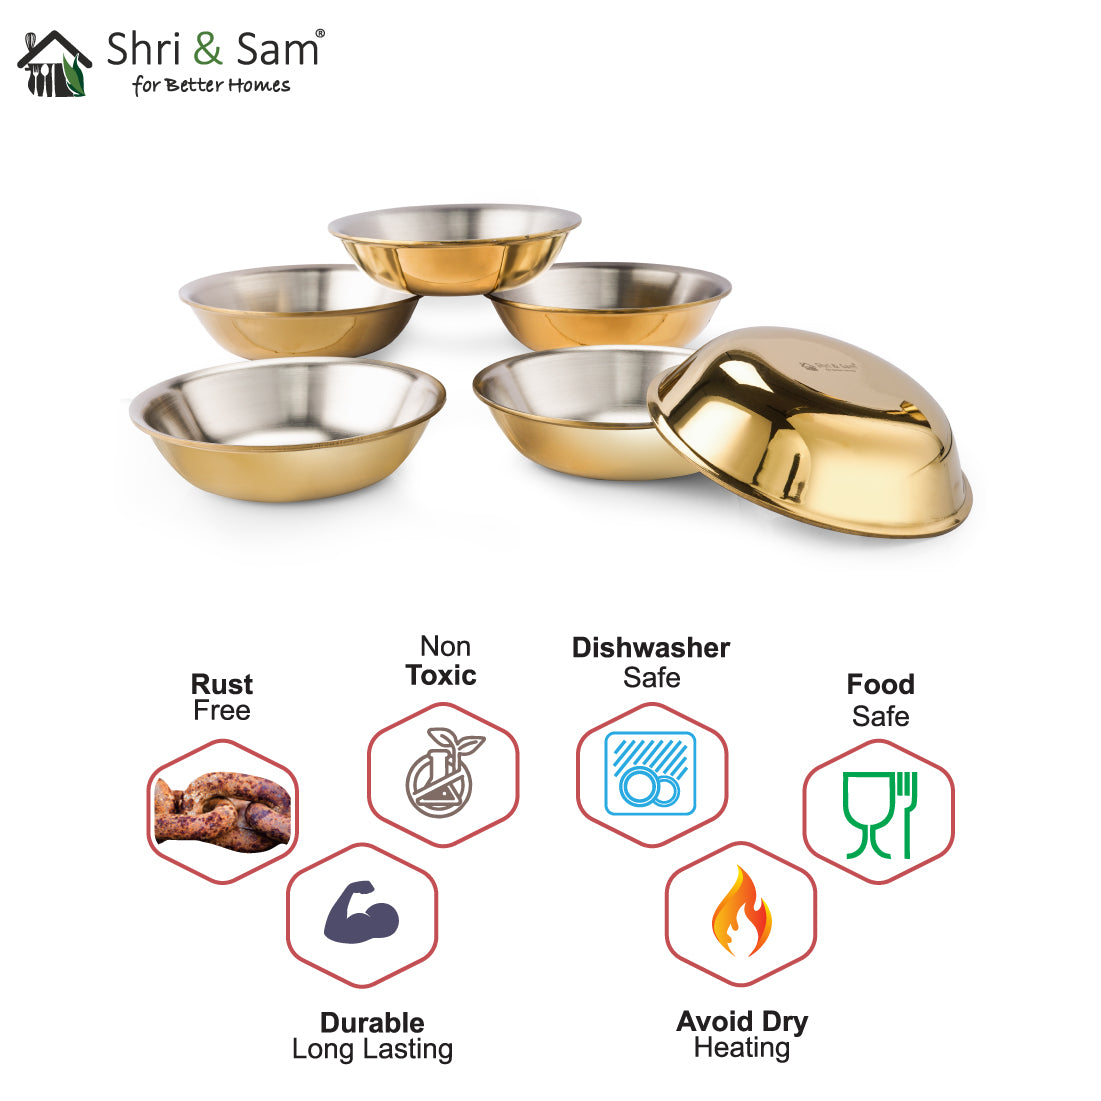 Stainless Steel 6 PCS Big Bowl with Gold PVD Coating Signature - Matt